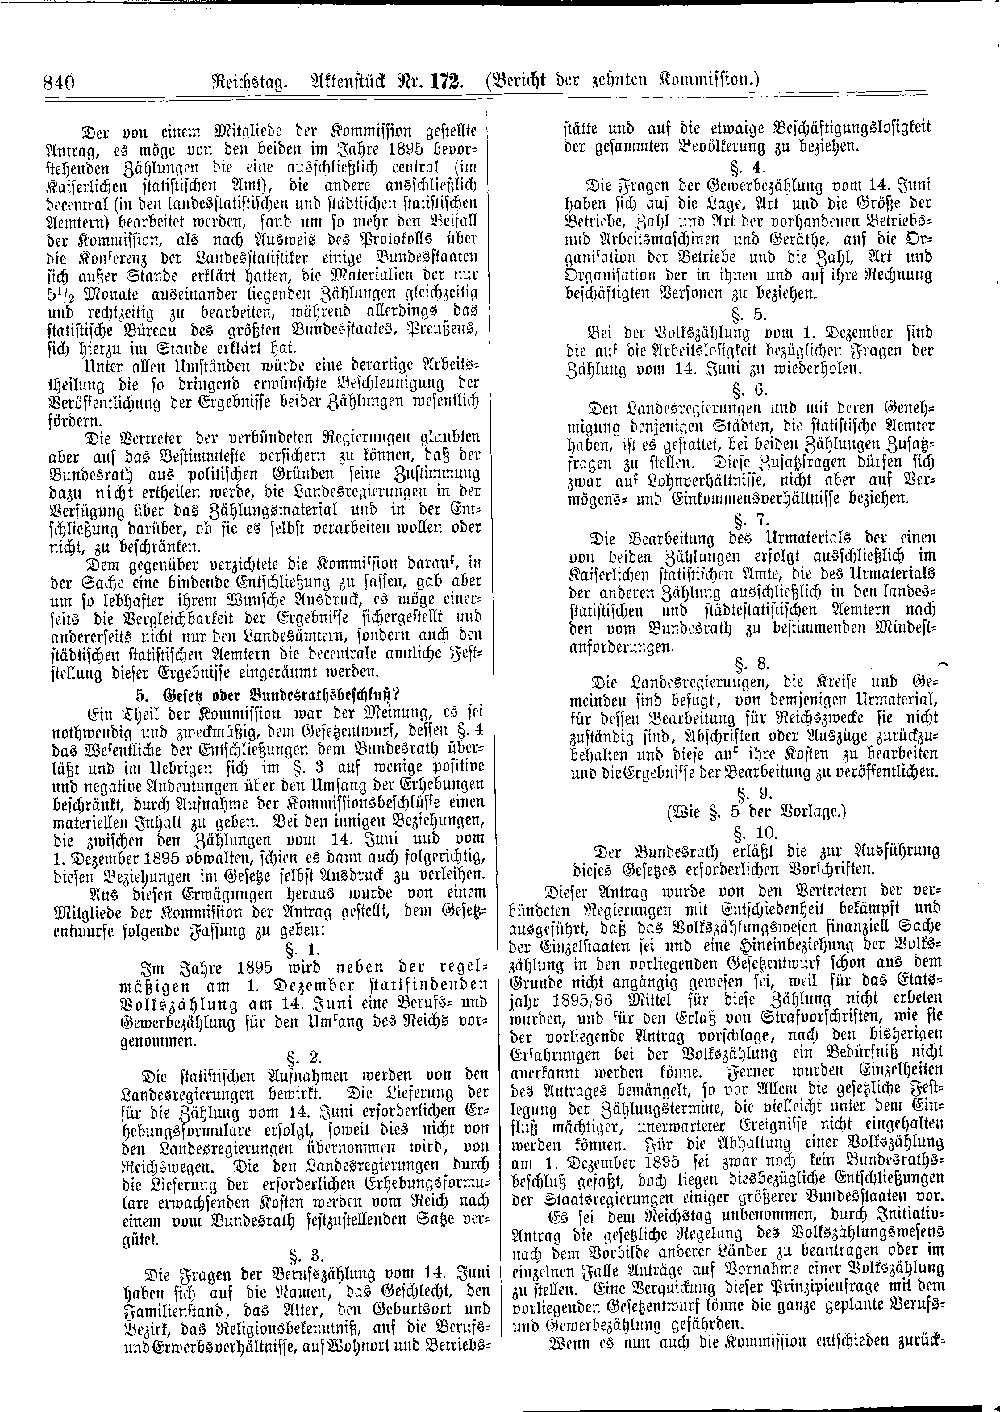 Scan of page 840